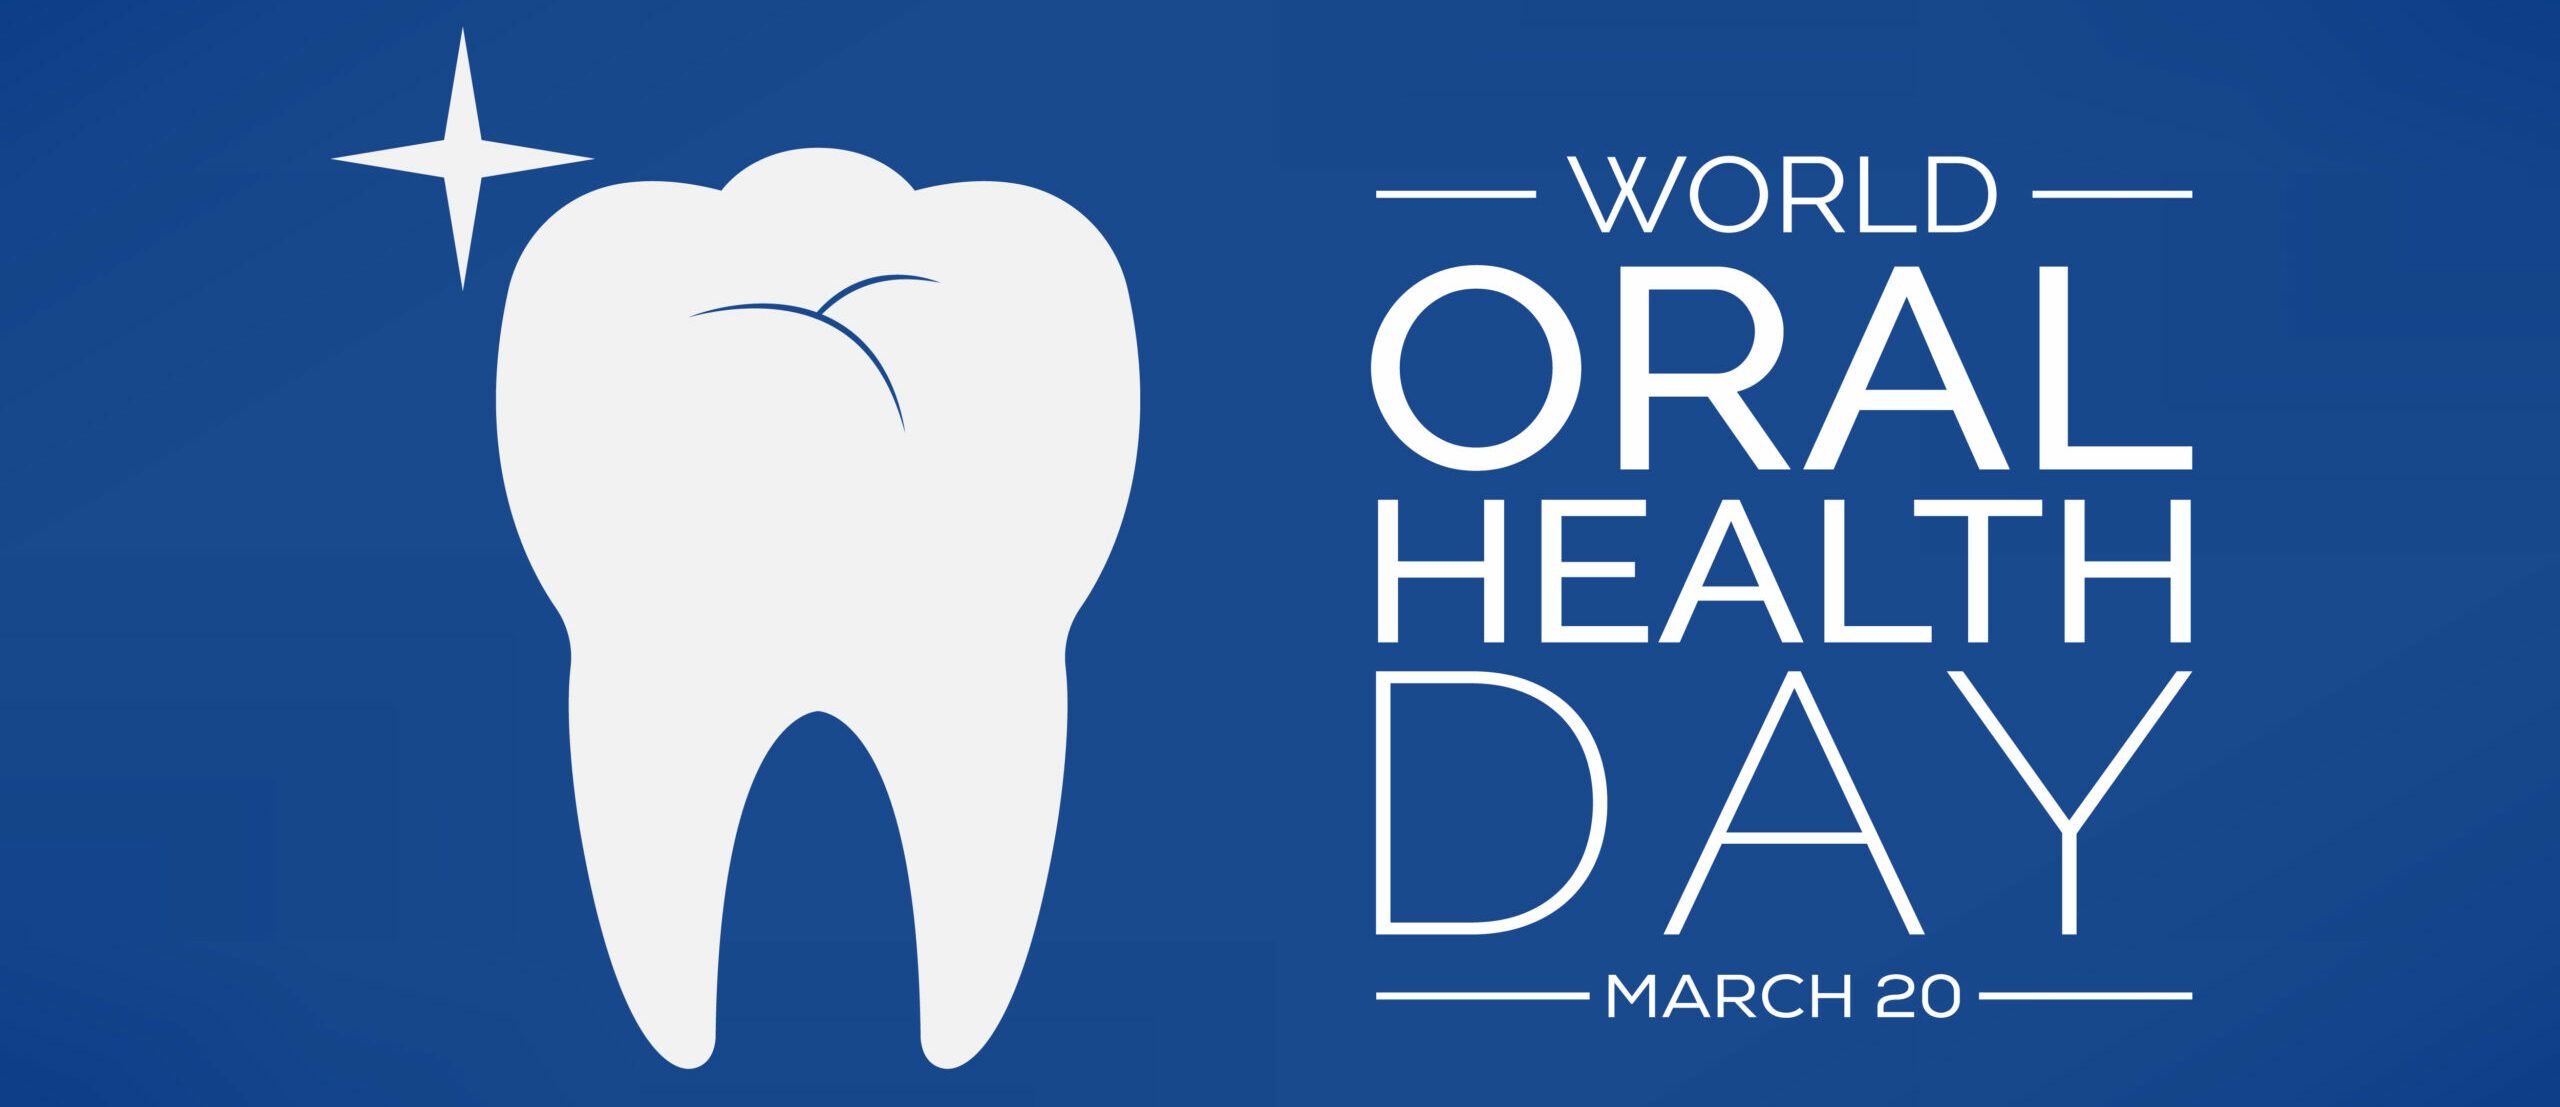 World Oral Health Day Image